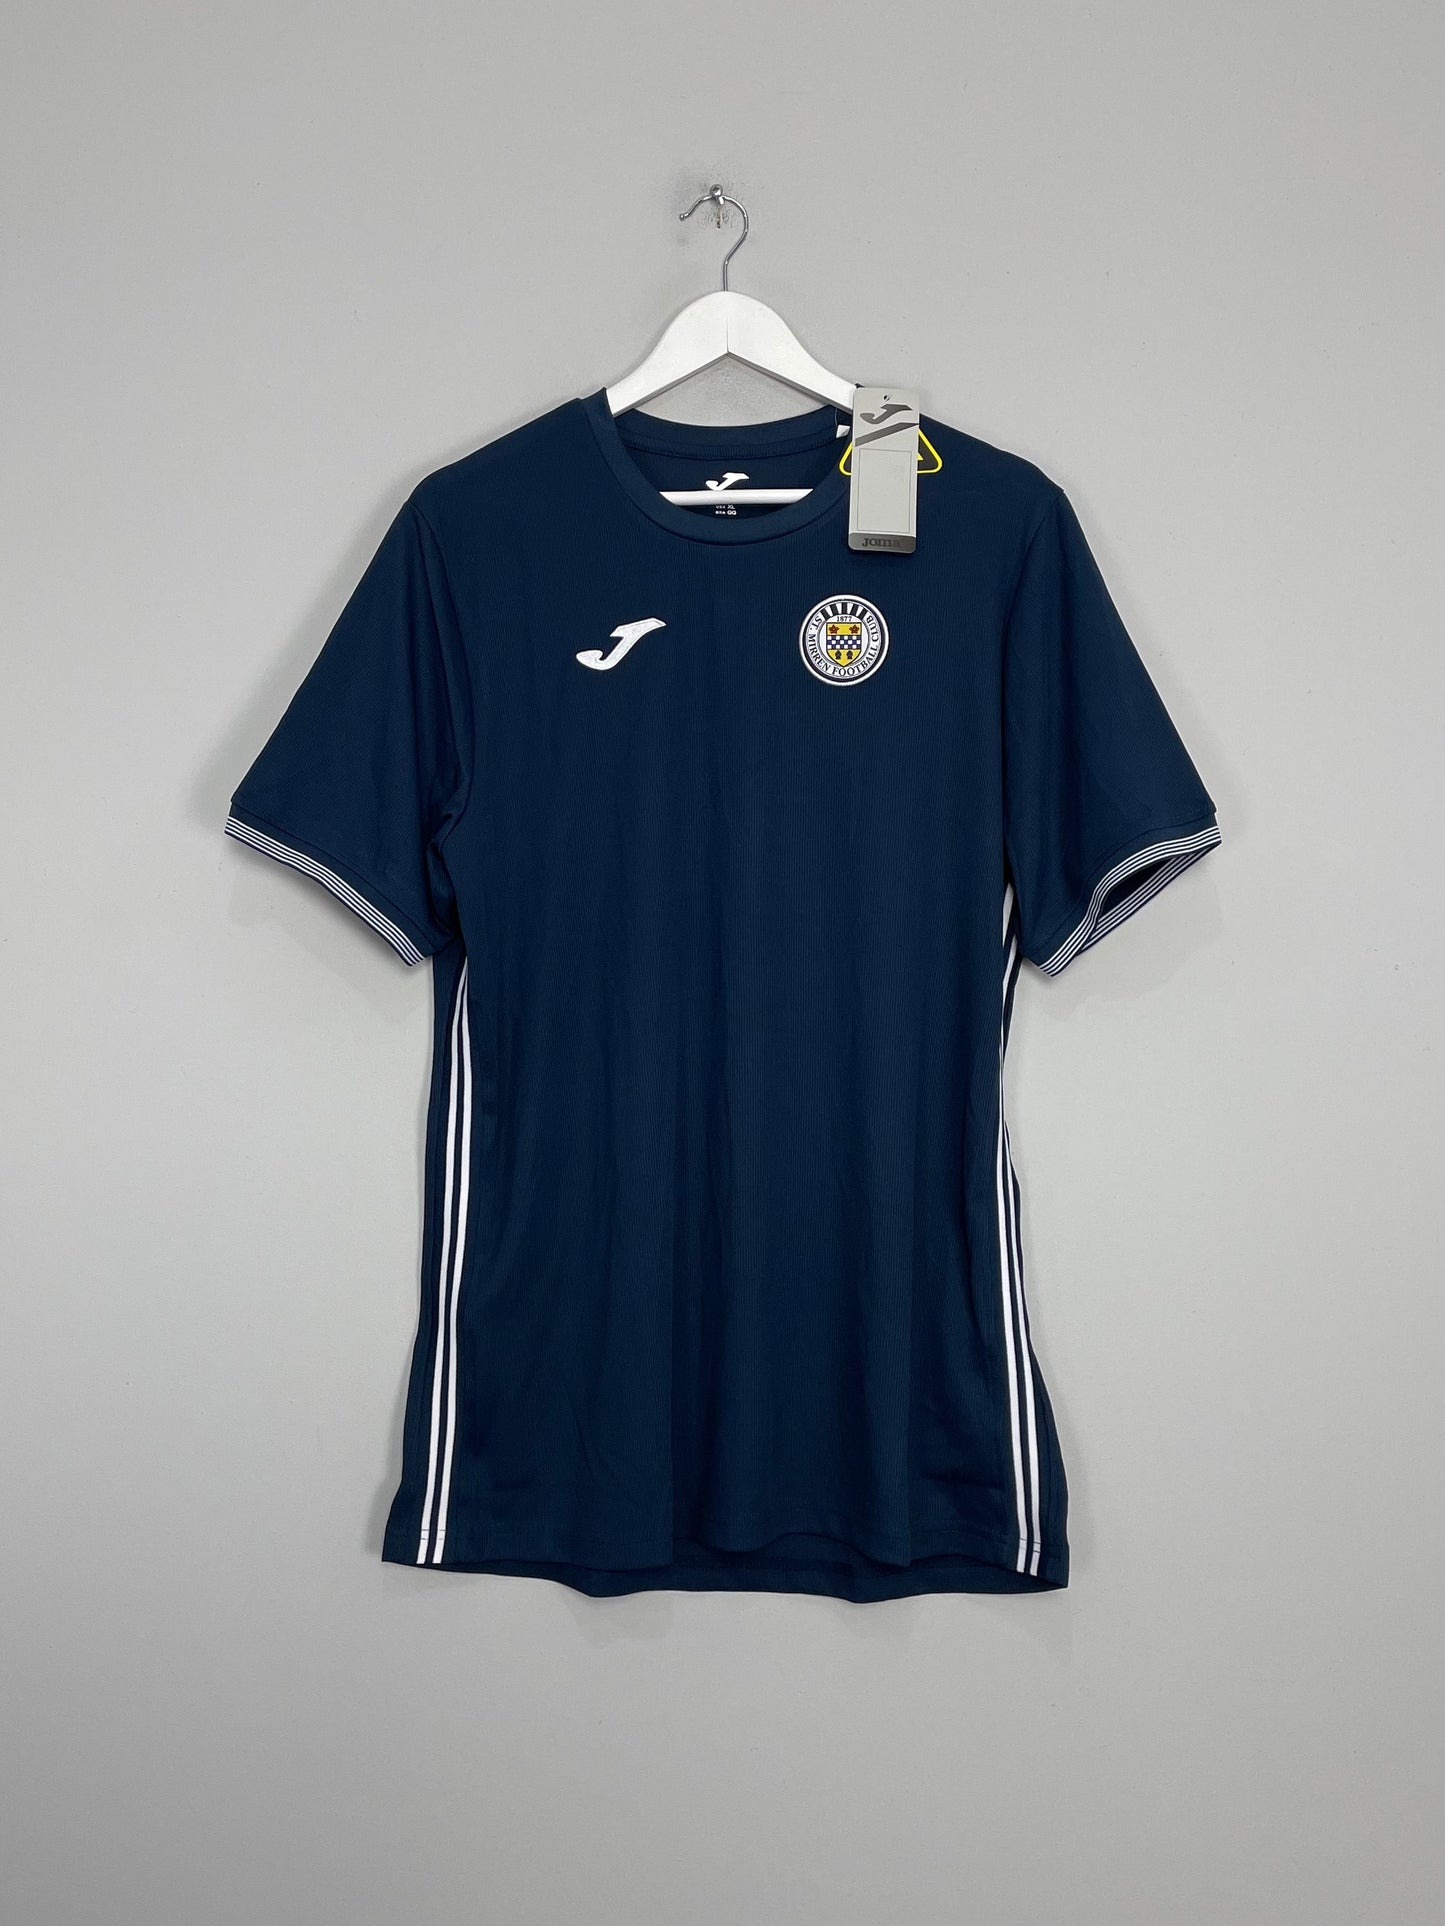 Image of the ST Mirren shirt from the 2021/22 season